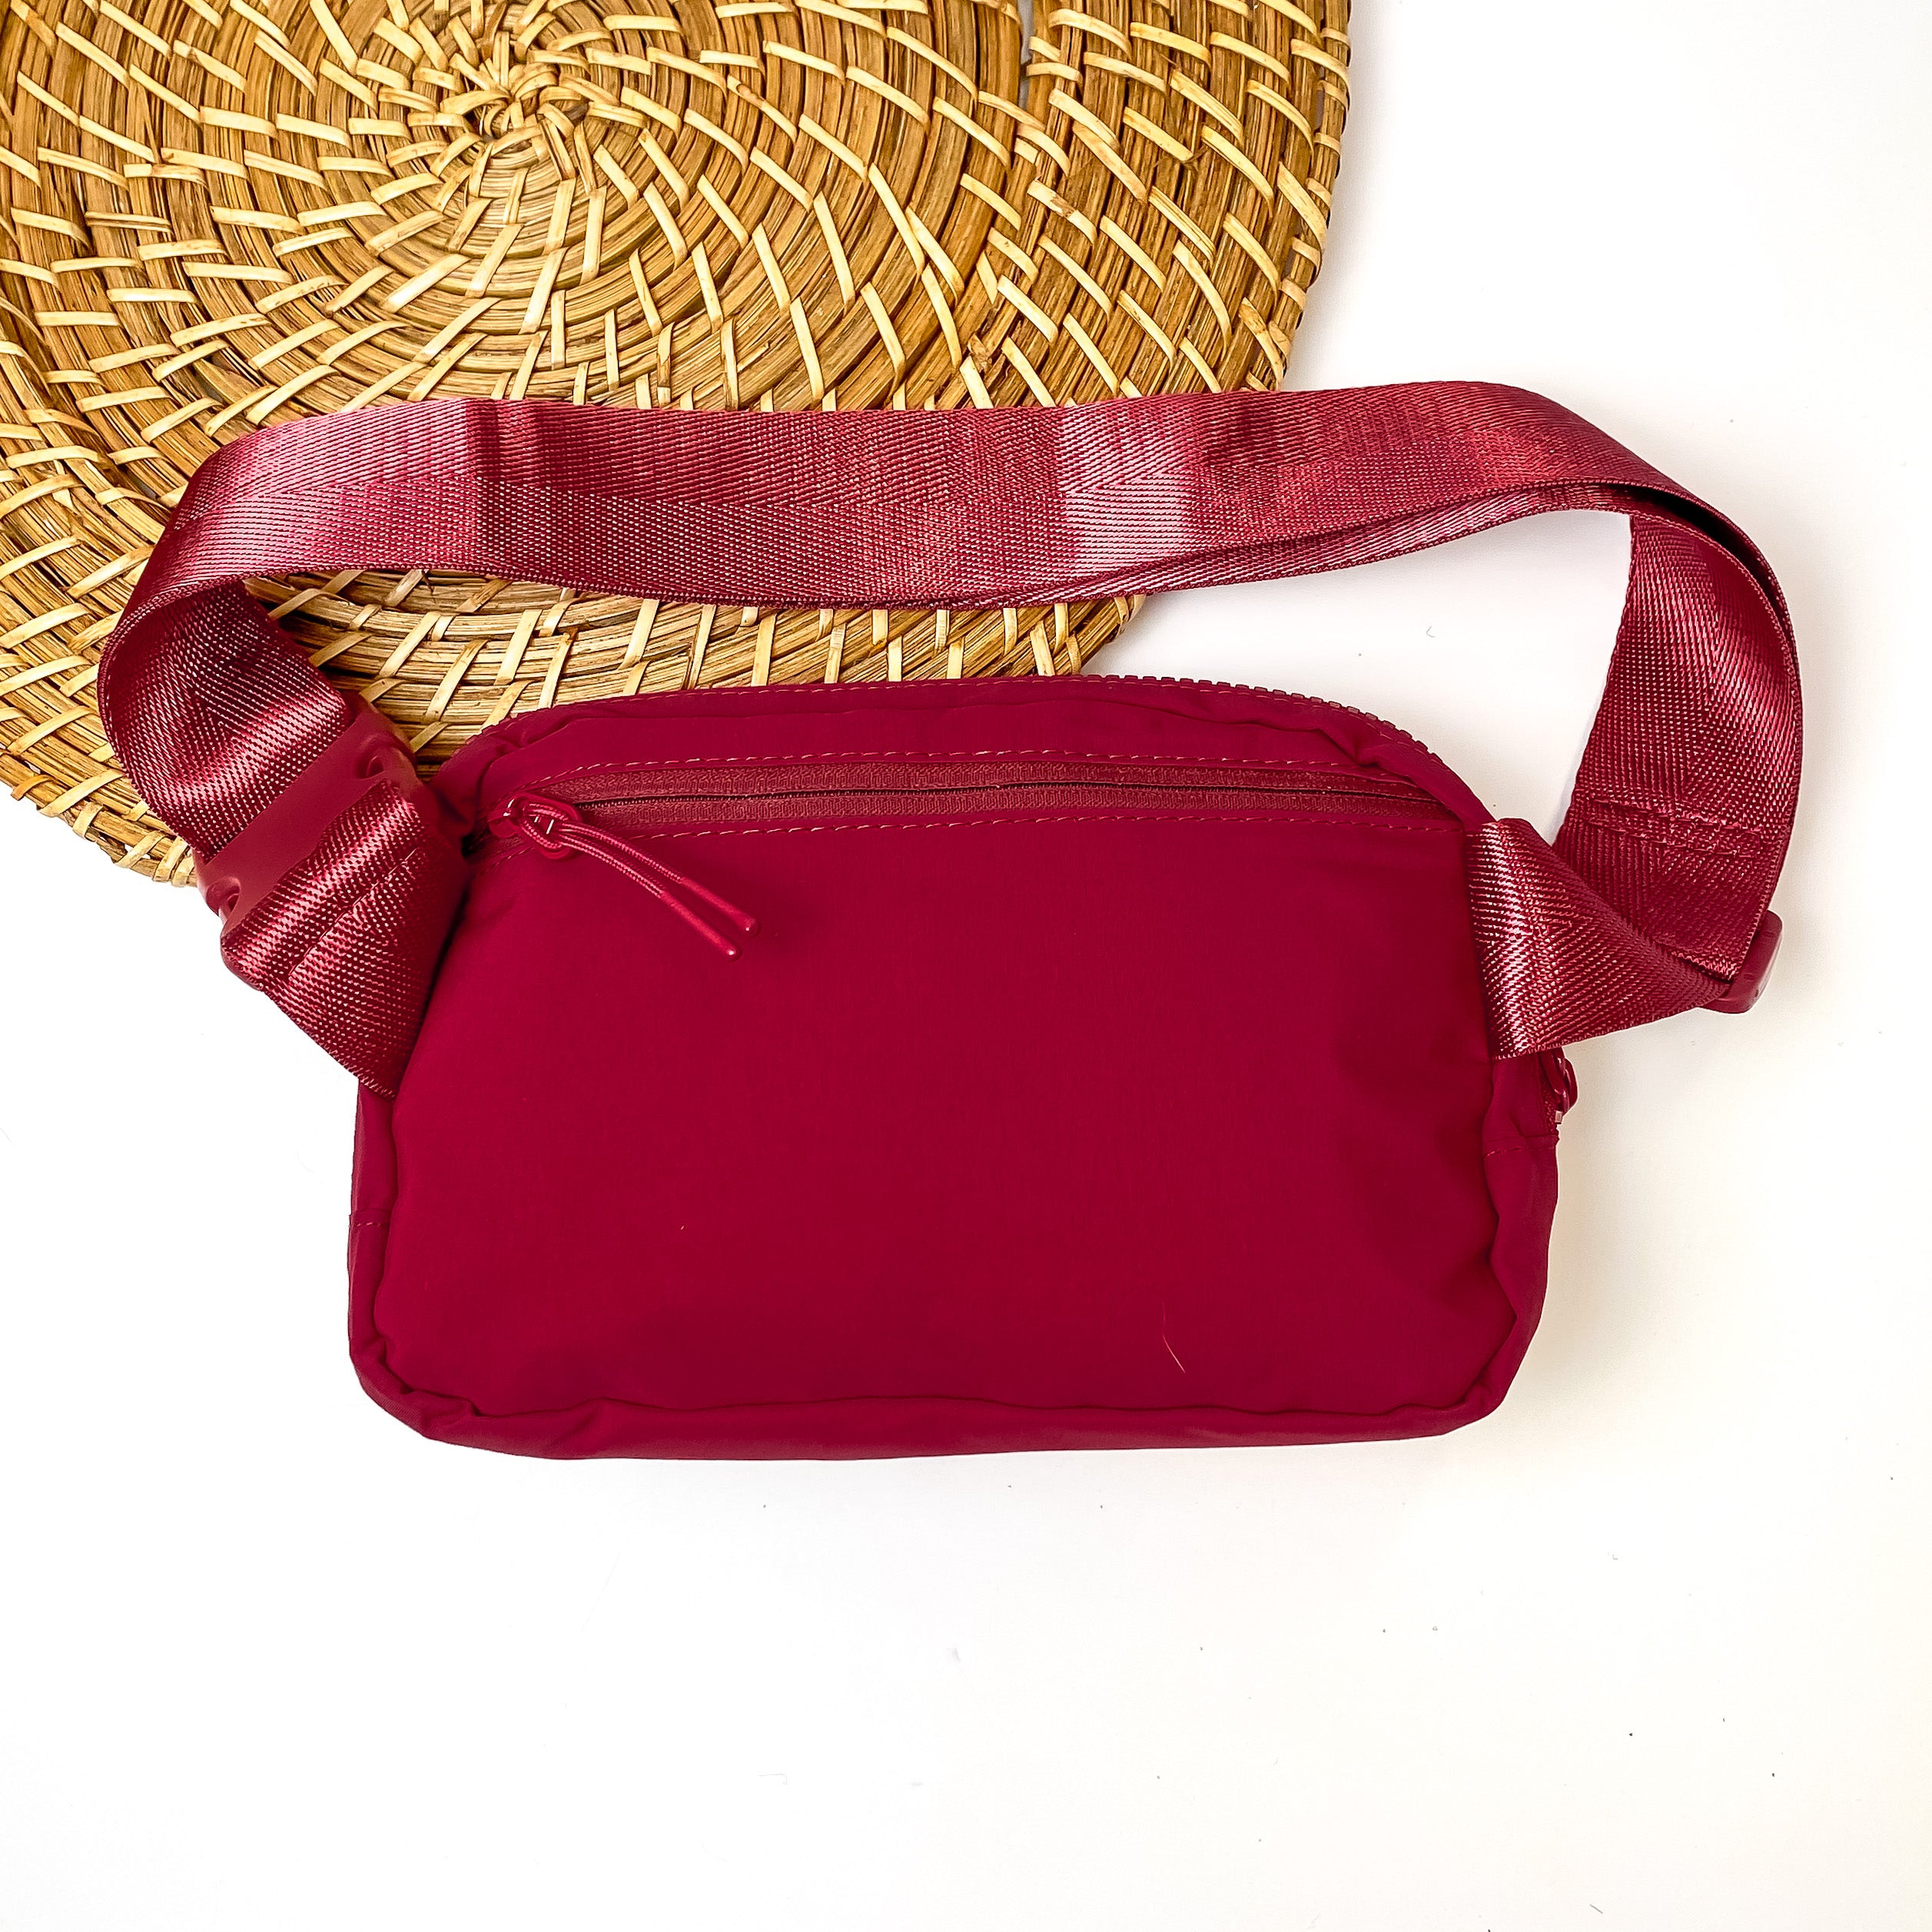 Love the Journey Fanny Pack in Maroon - Giddy Up Glamour Boutique